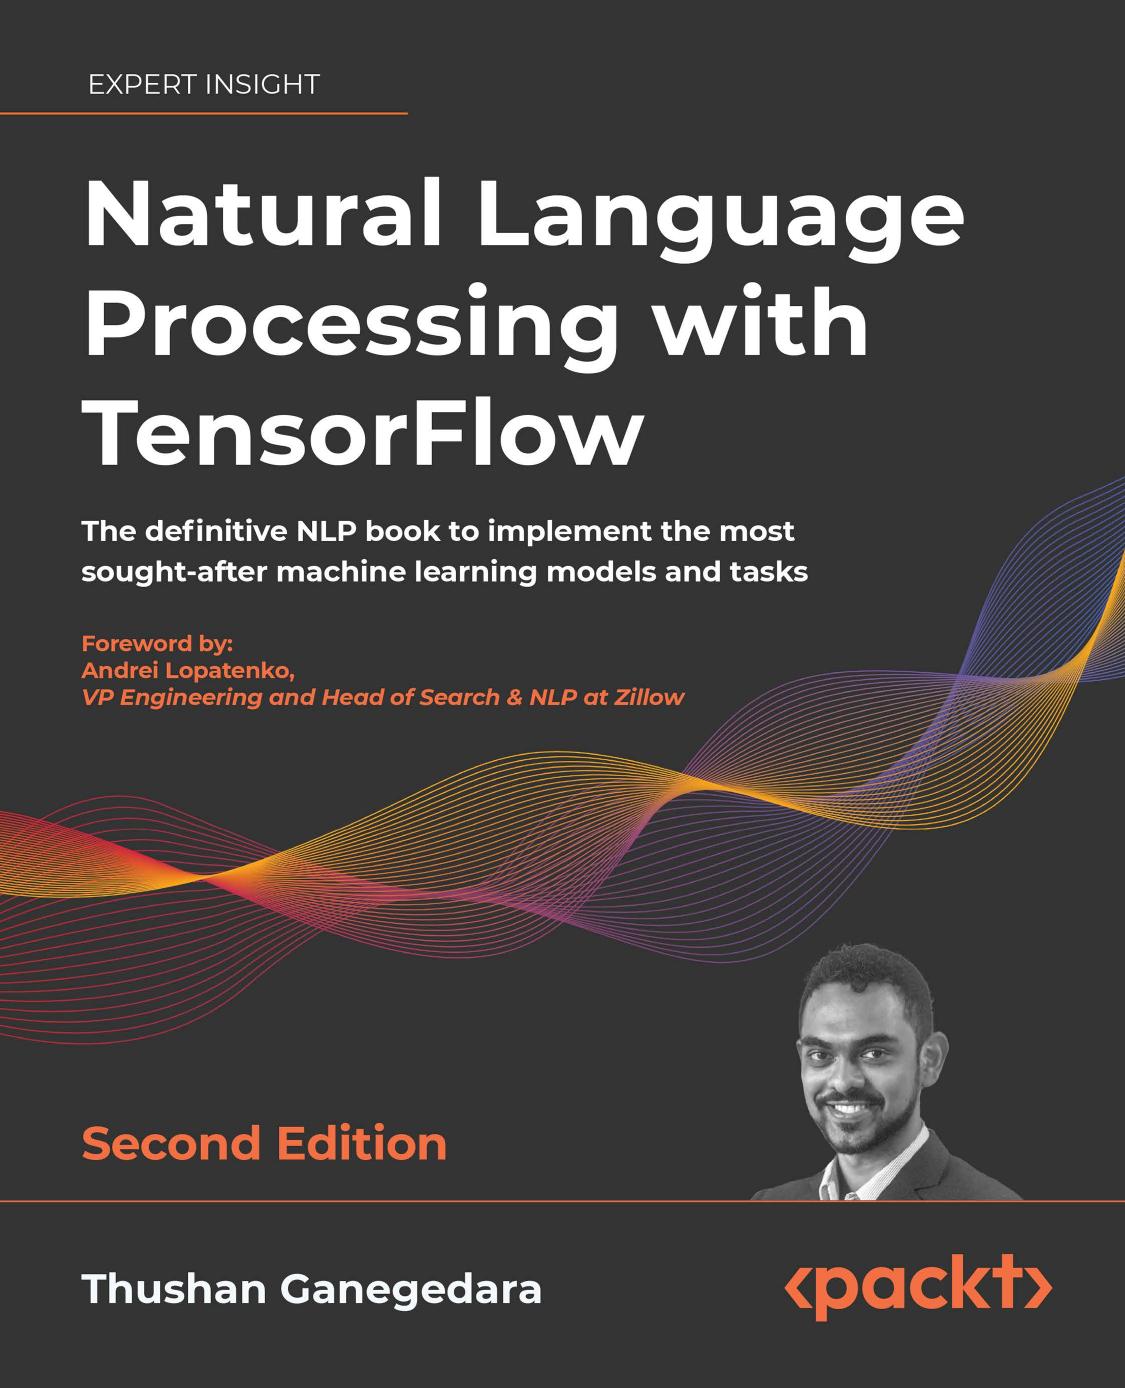 Natural Language Processing With TensorFlow: The Definitive NLP Book to Implement the Most Sought-After Machine Learning Models and Tasks